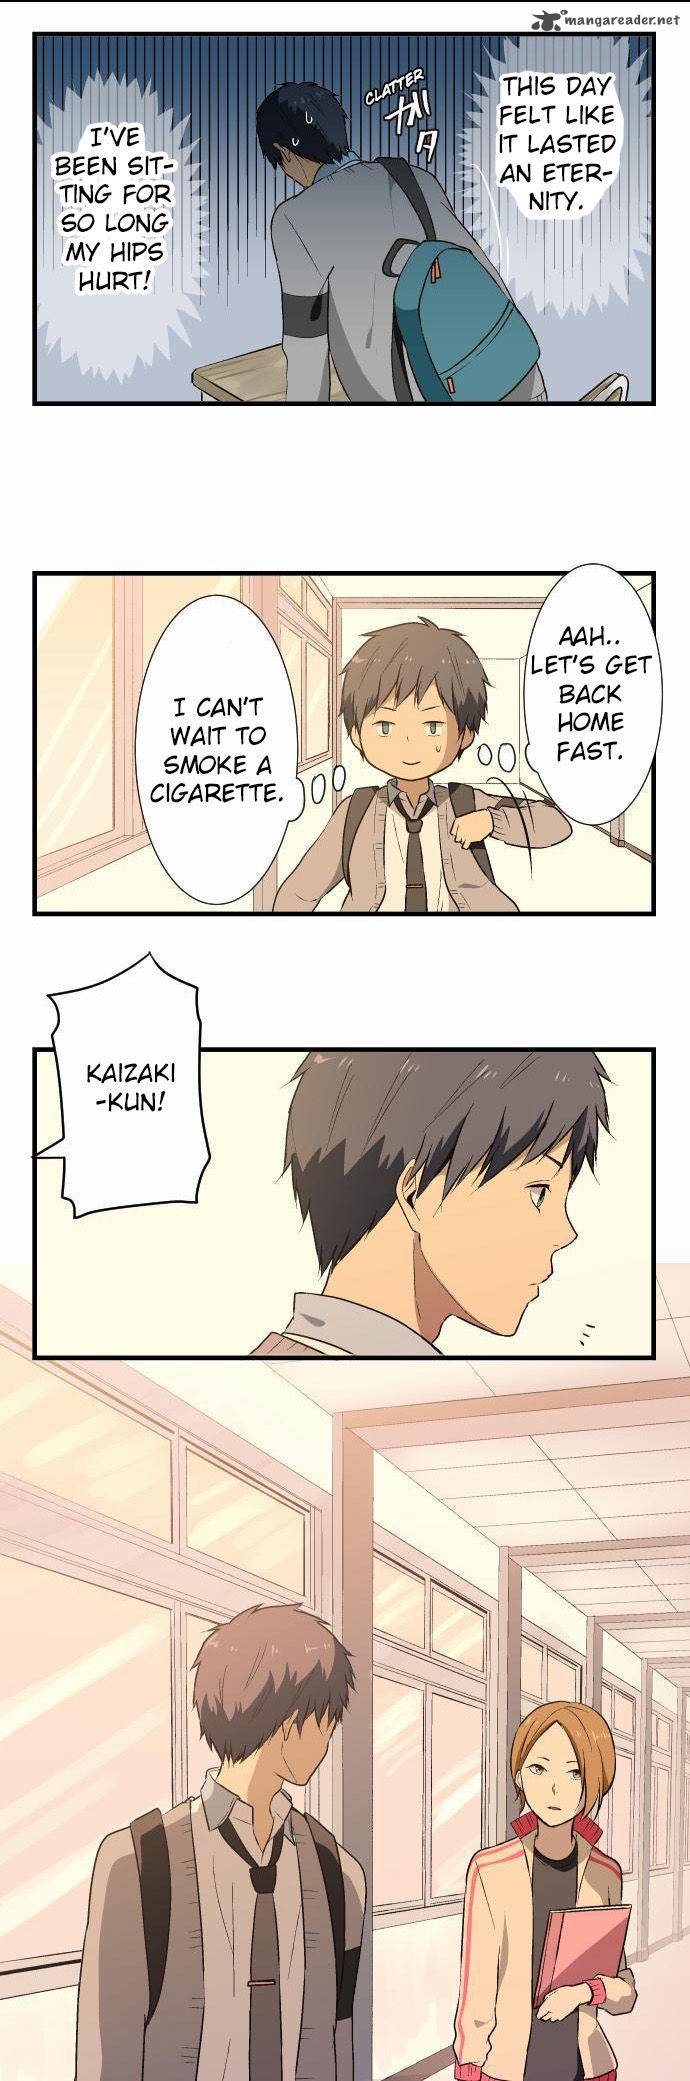 Relife 15 14